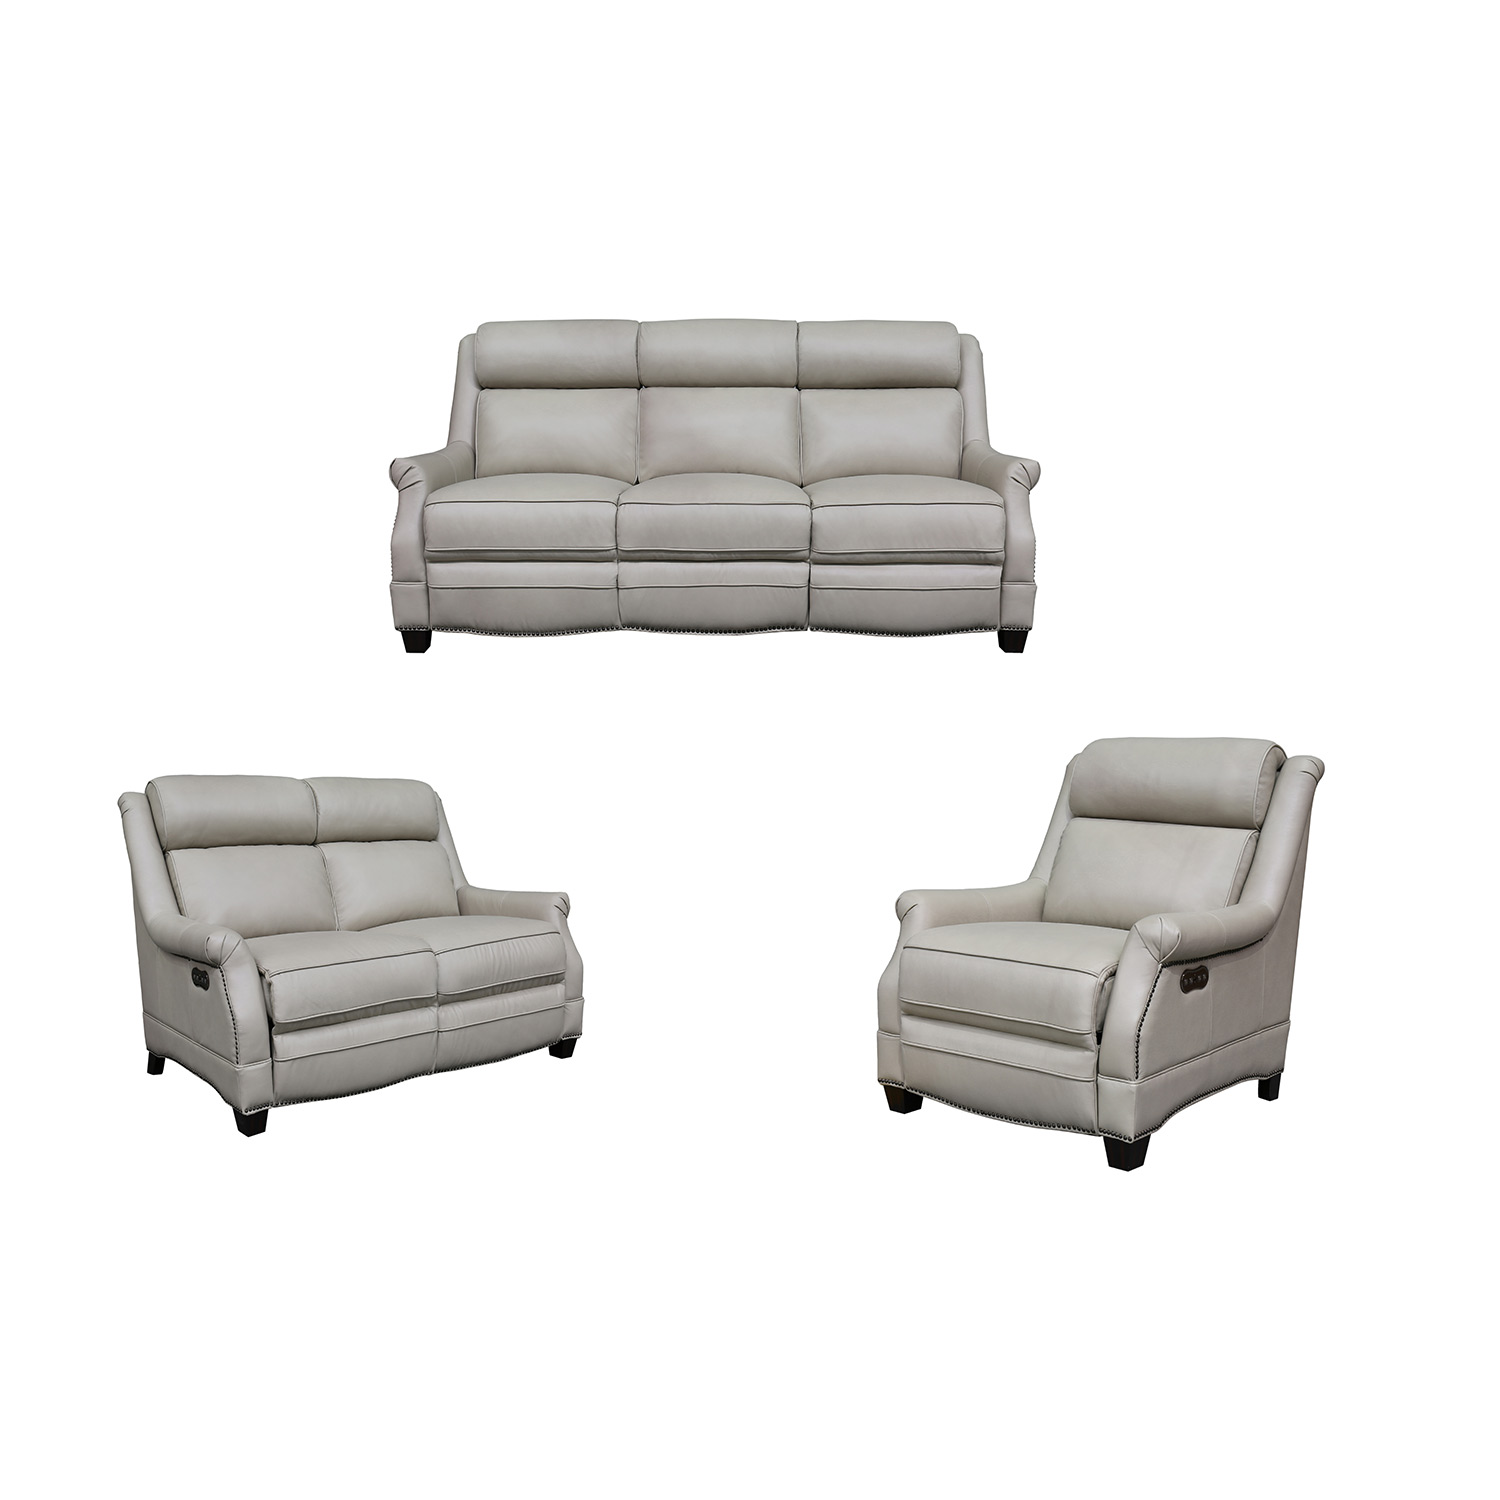 Barcalounger Warrendale Power Reclining Sofa Set with Power Head Rests - Shoreham Cream/All Leather